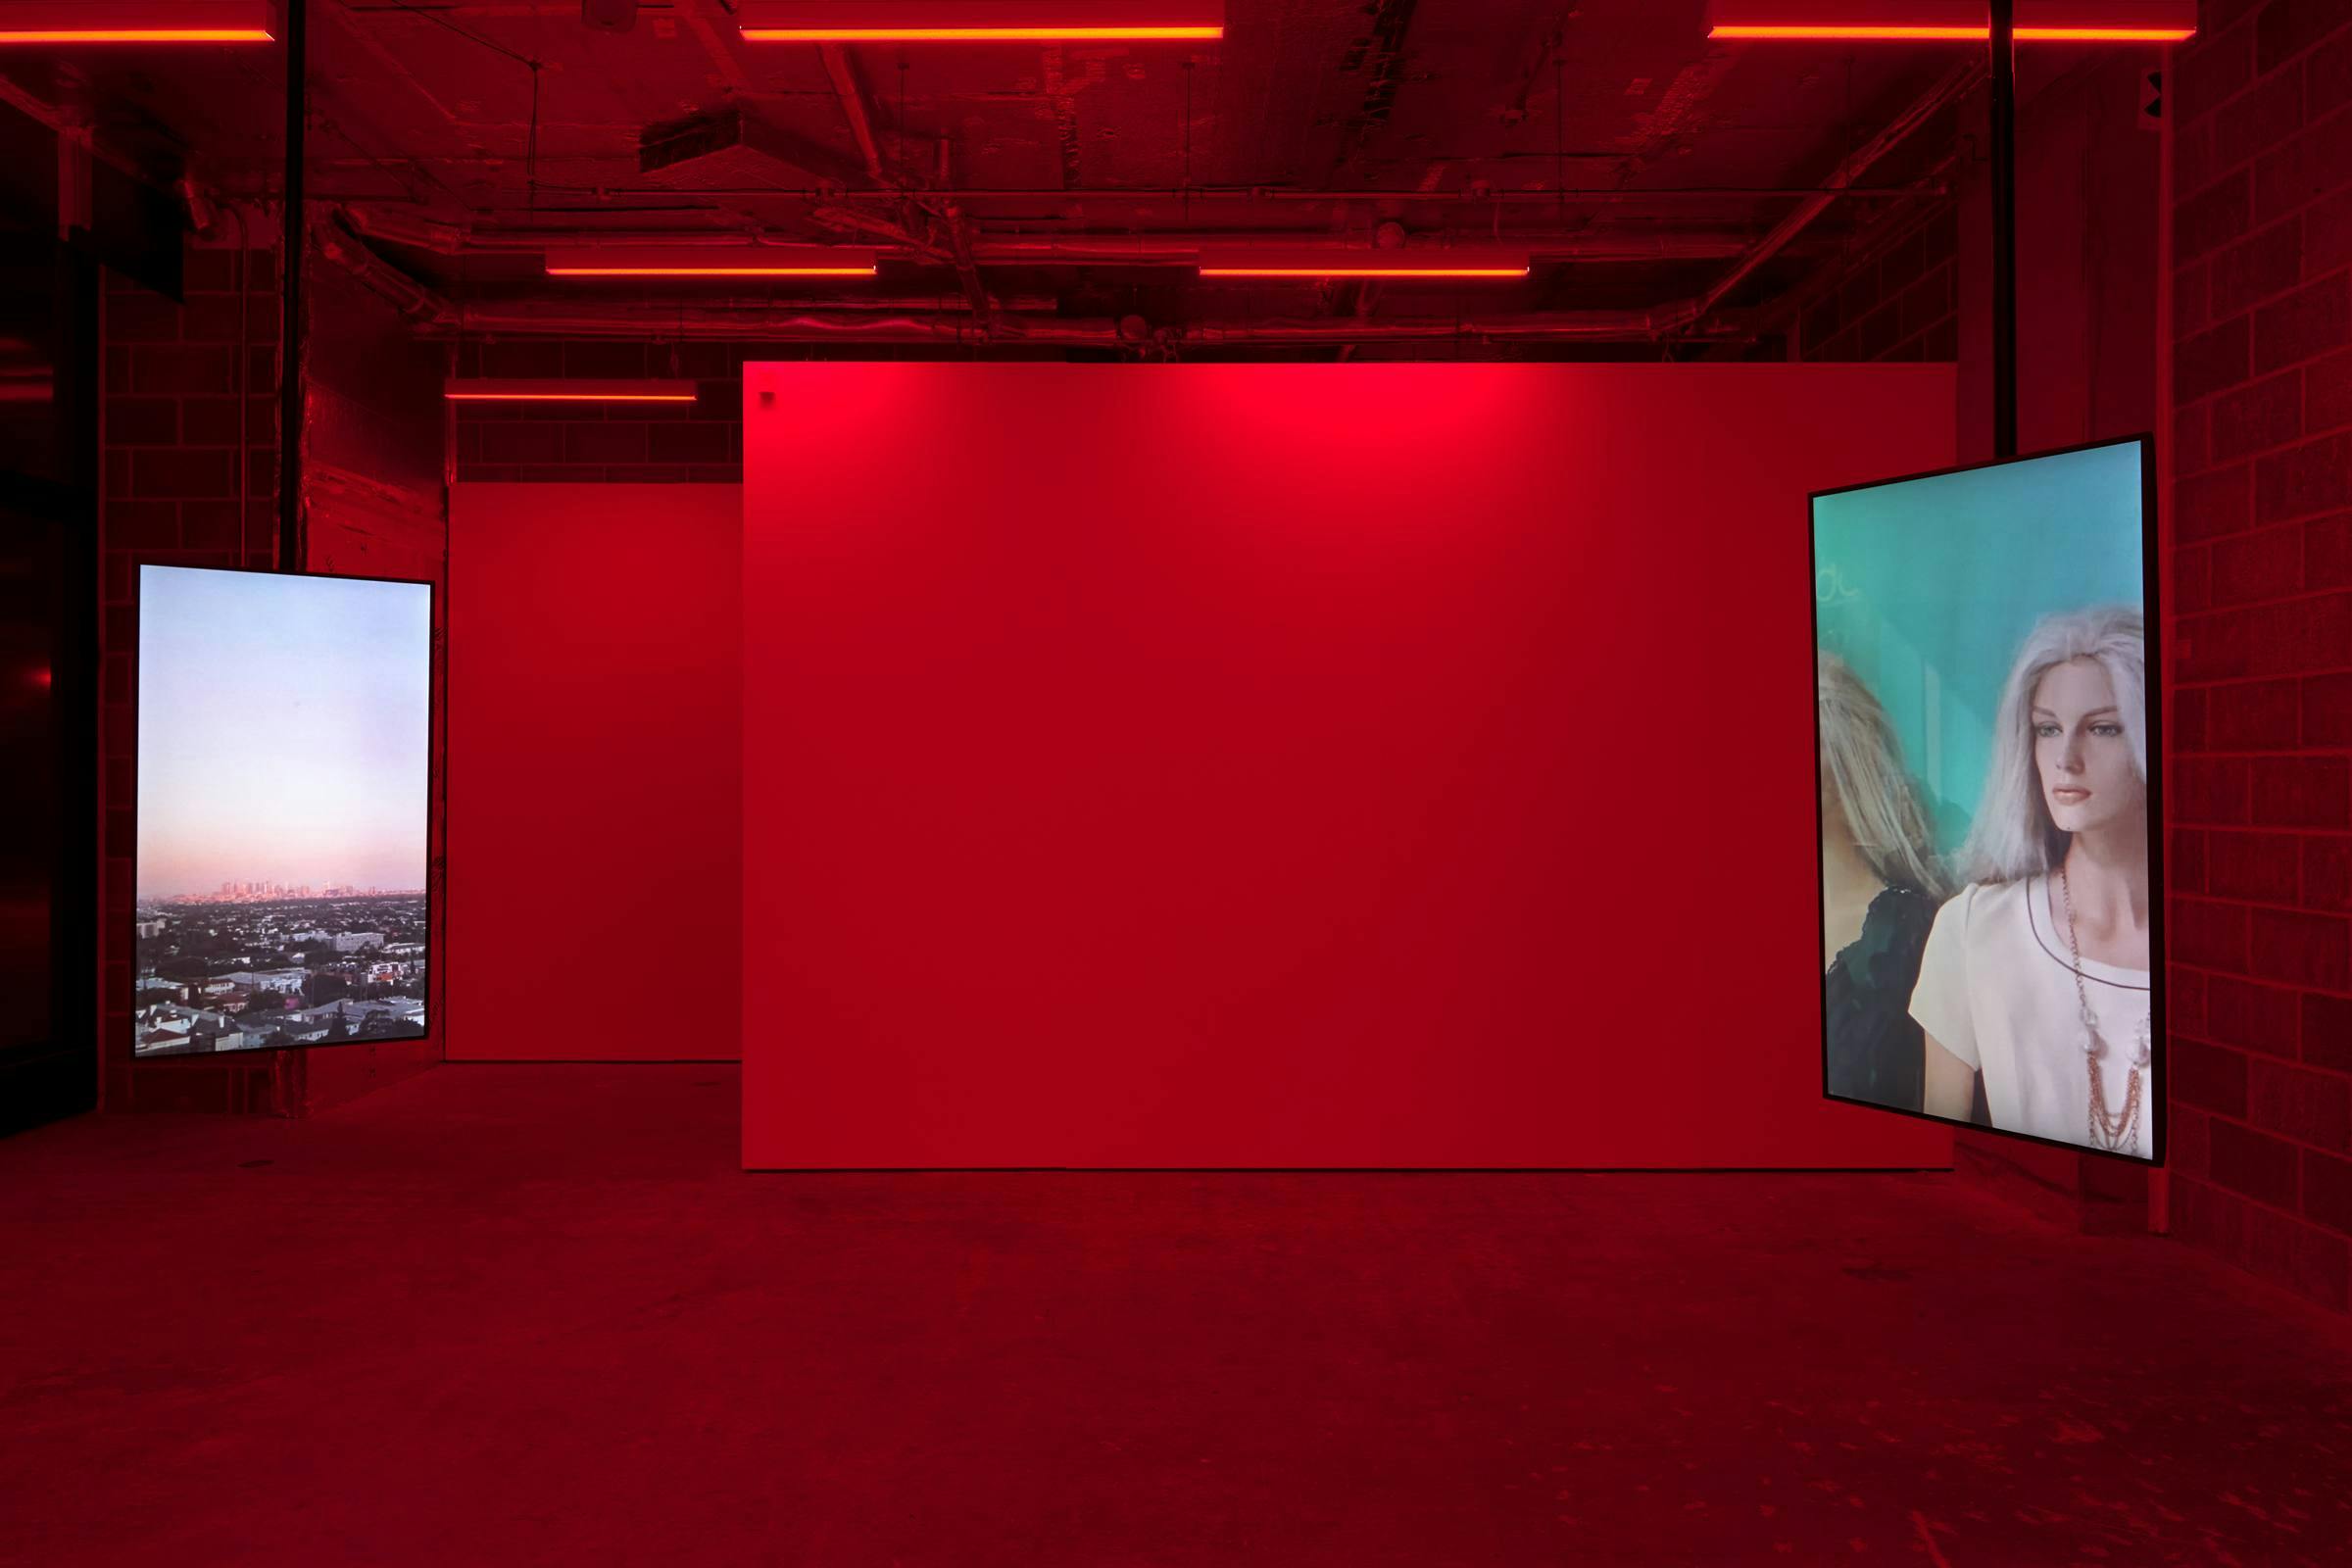 A image of art works in a gallery space. The space is lit red and there are 2 vertical monitors on view that are suspended from the ceiling